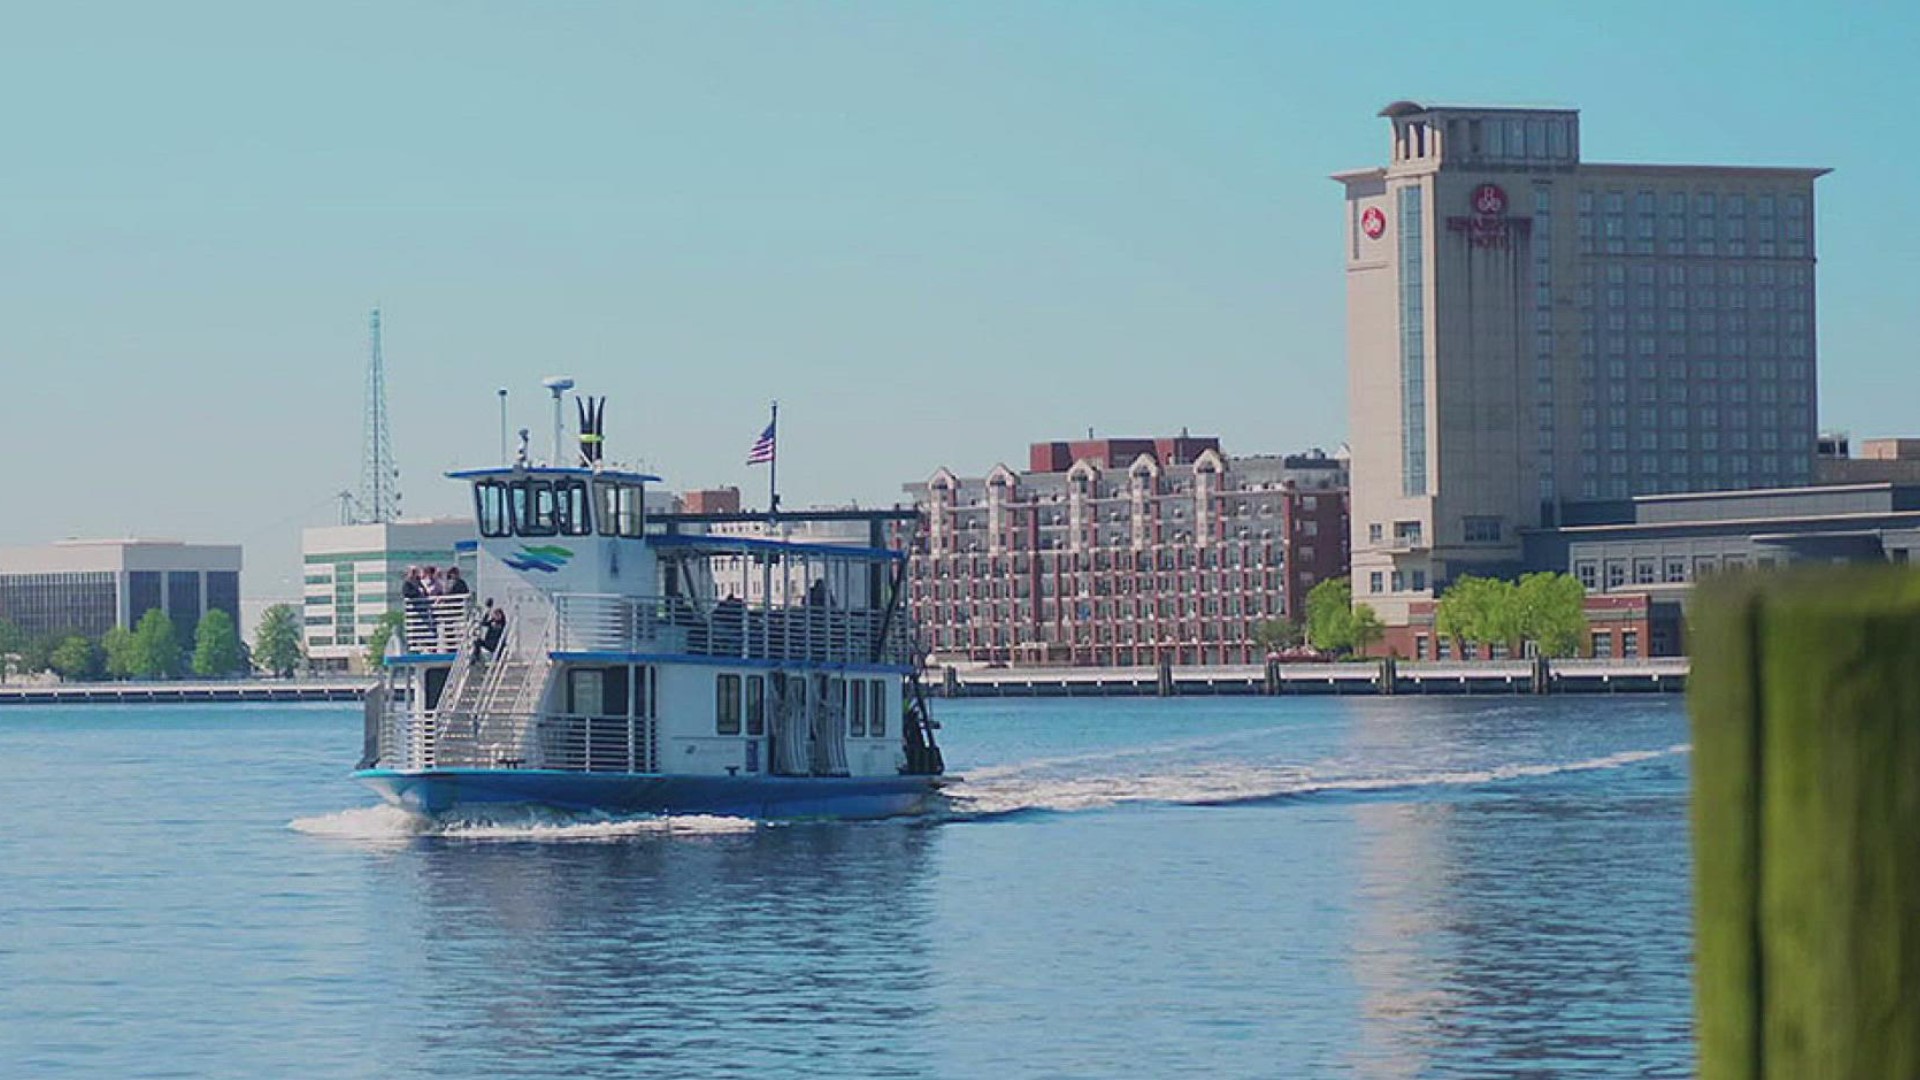 The Elizabeth River Ferry which runs between Norfolk and Portsmouth is suspending service on Friday due to stormy weather from Hurricane Ian.